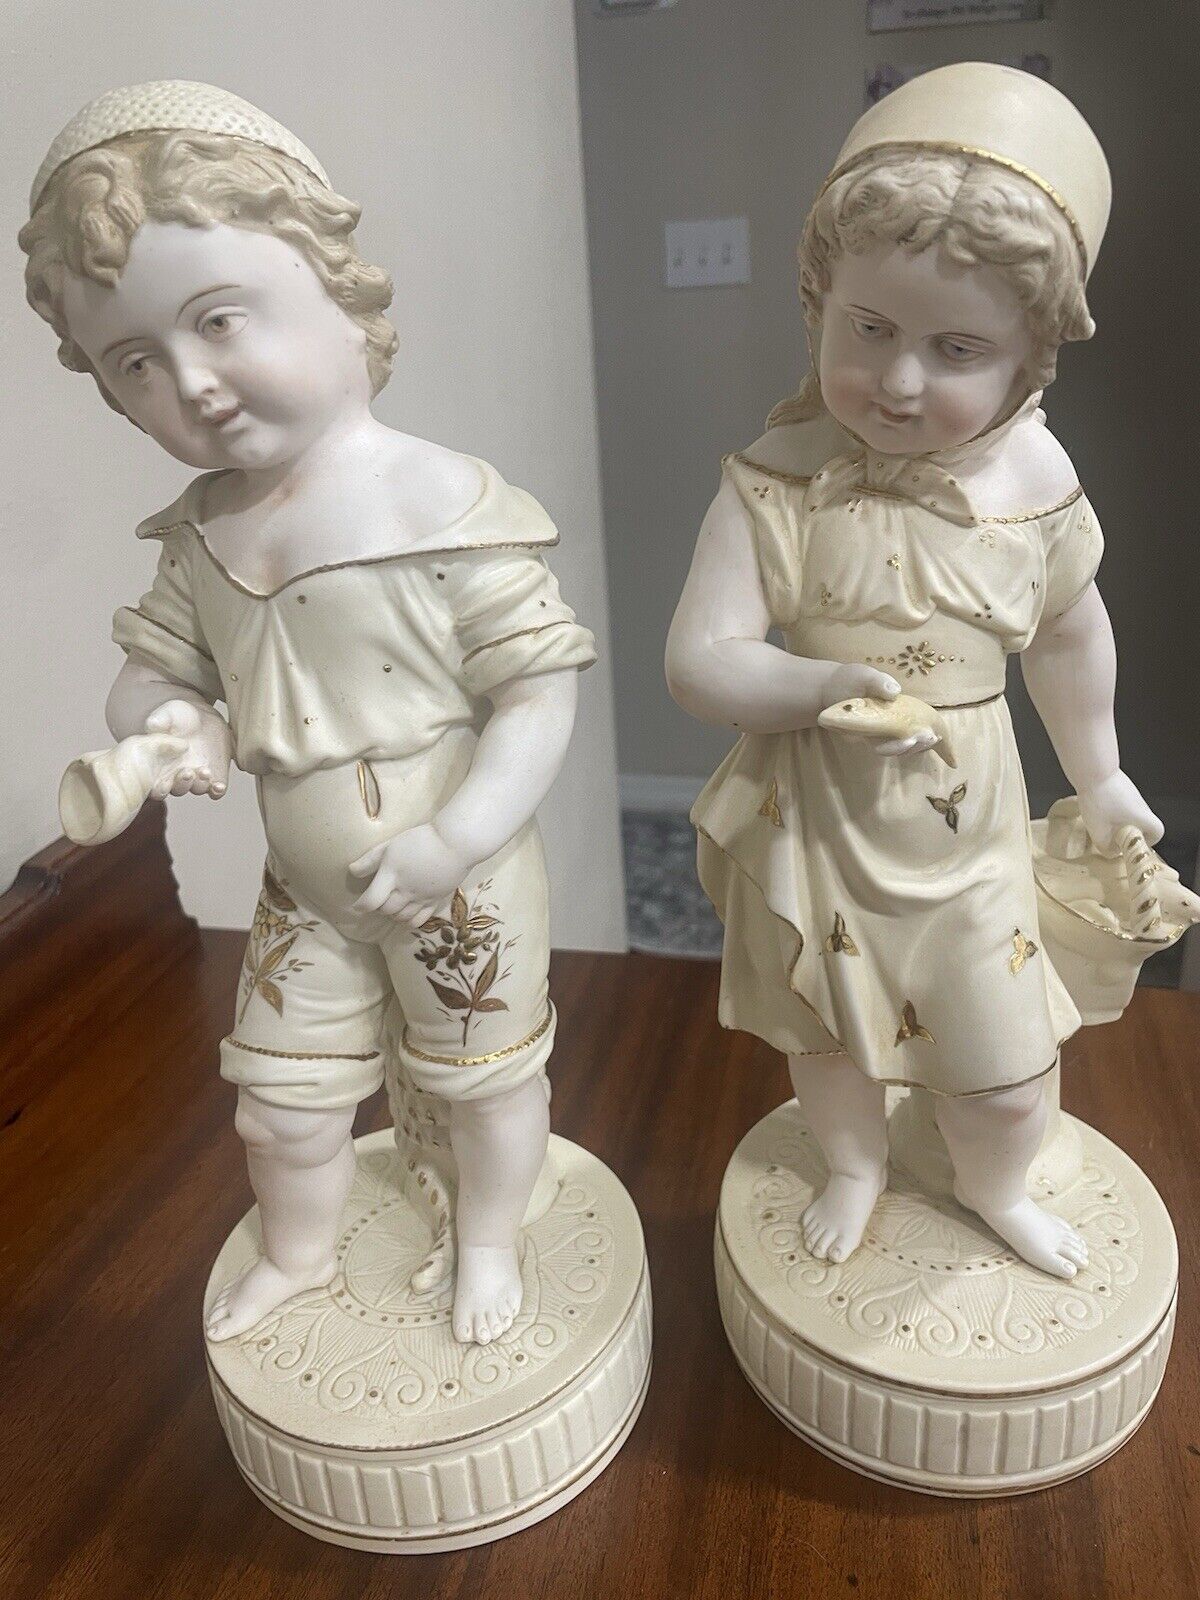 Large Victorian Bisque Porcelain Figurines Pair Boy & Girl Gold Accents